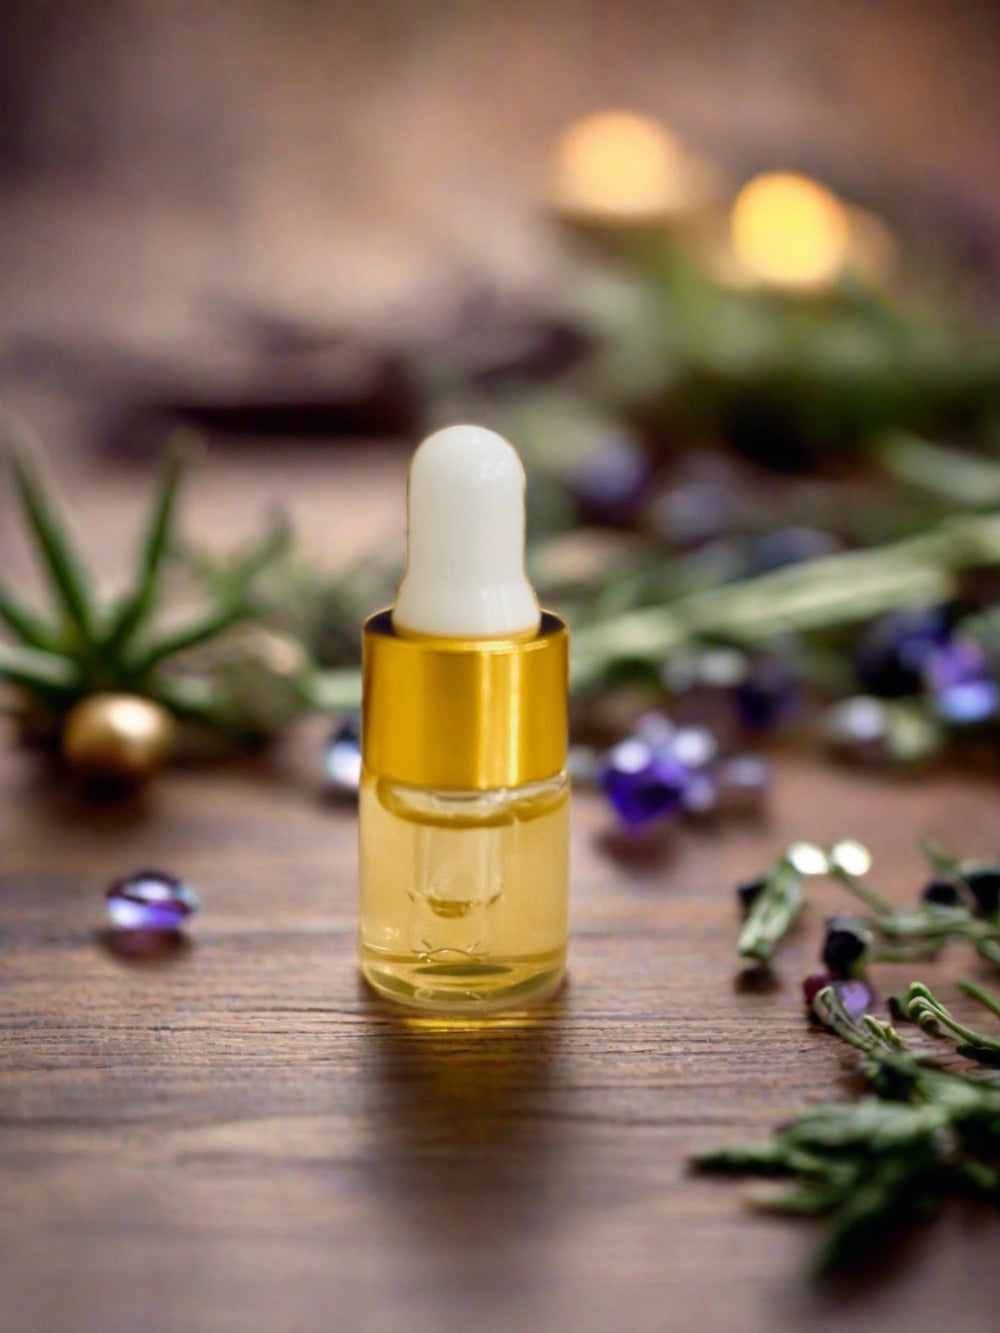 SAINT GERMAIN - Ascended Master Anointing Oil - Natural Perfume